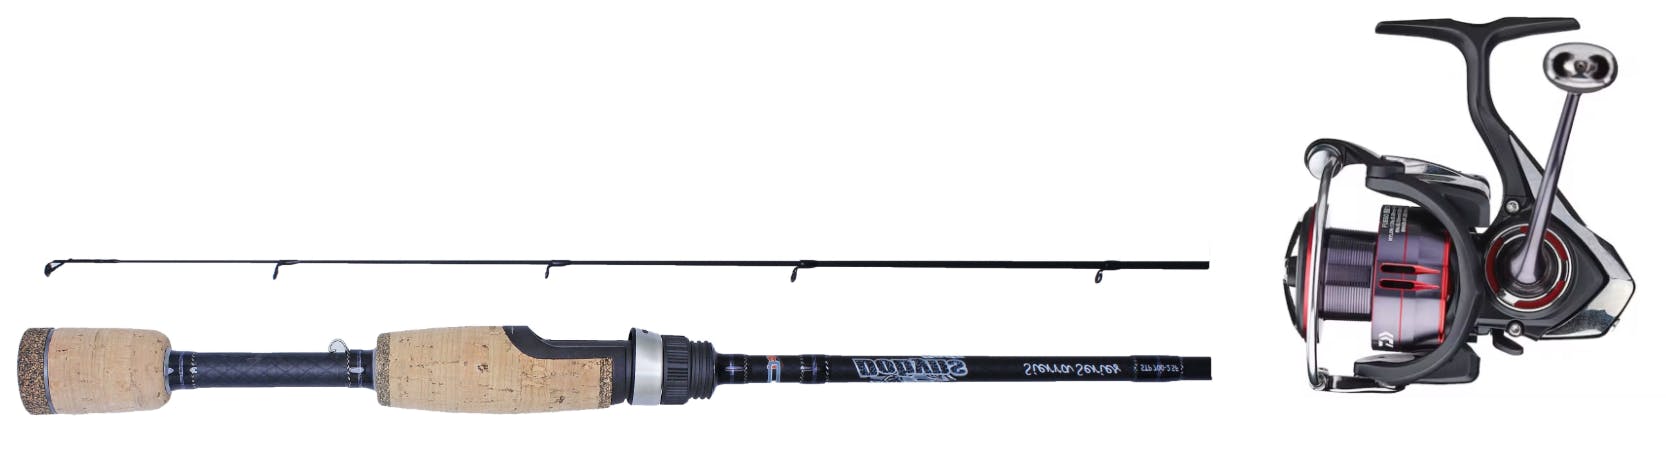 Best on a Budget: Rod/Reel Combos Under $200